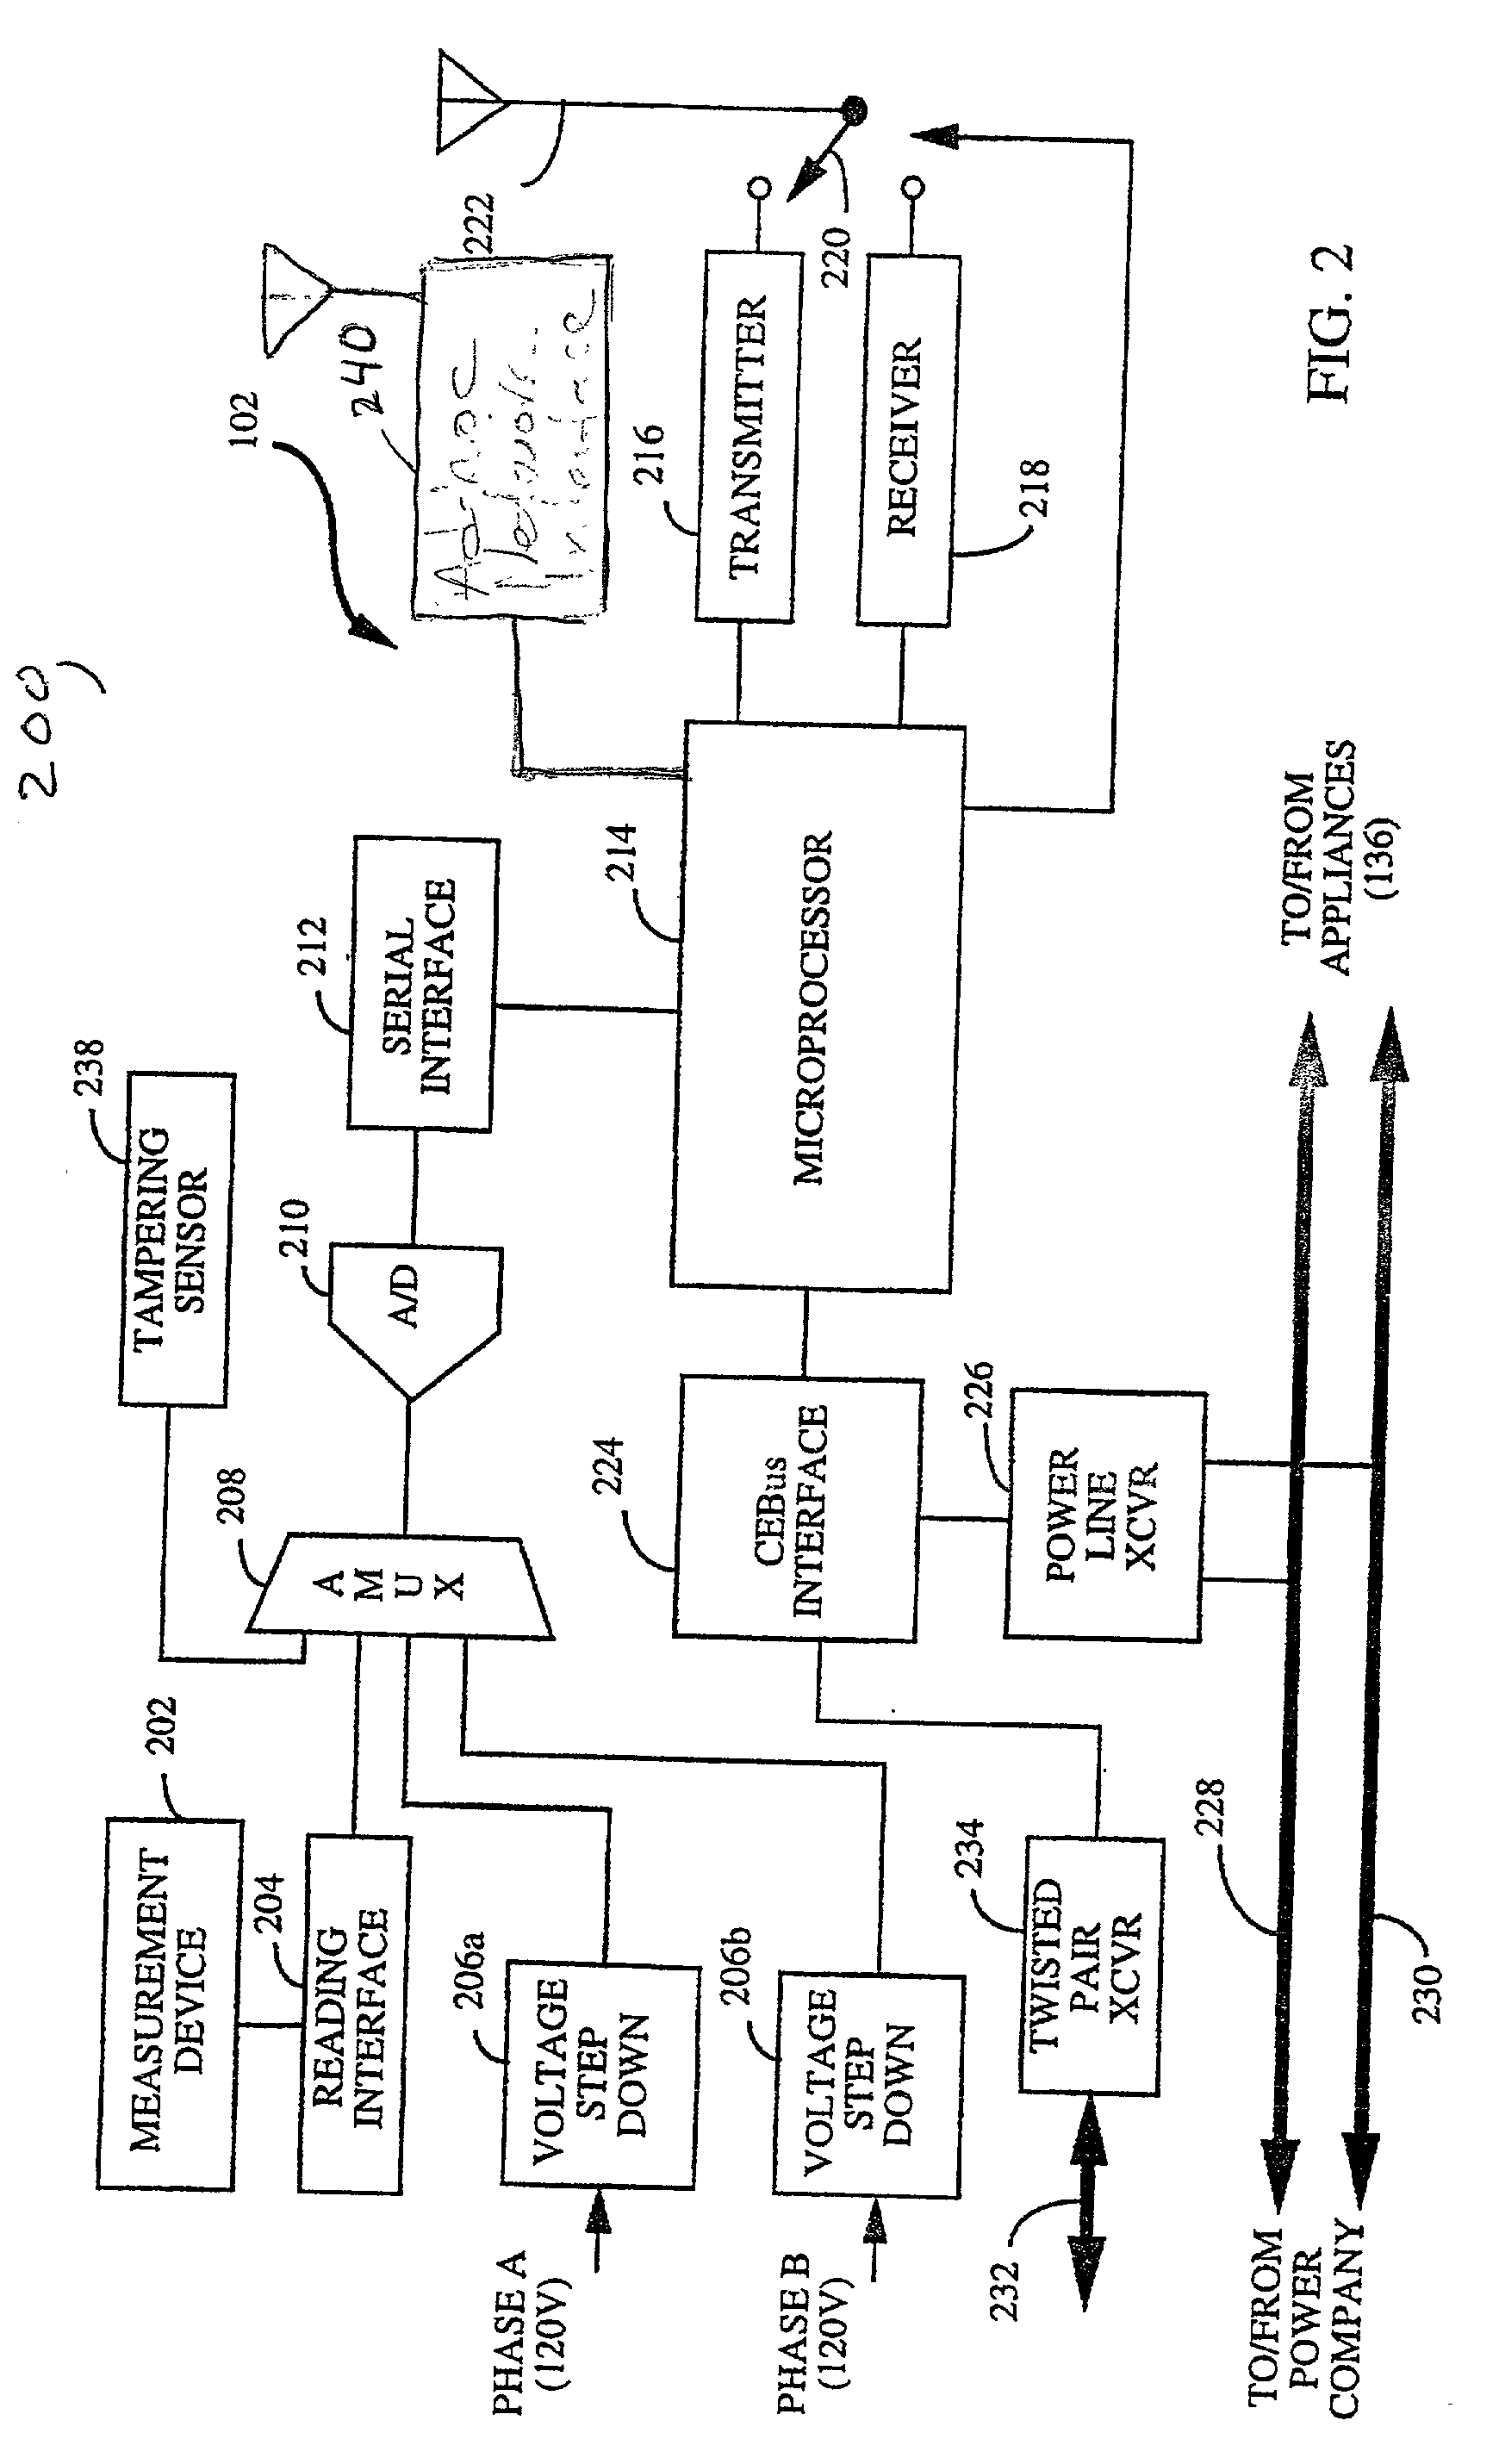 Method and apparatus for wireless remote telemetry using ad-hoc networks